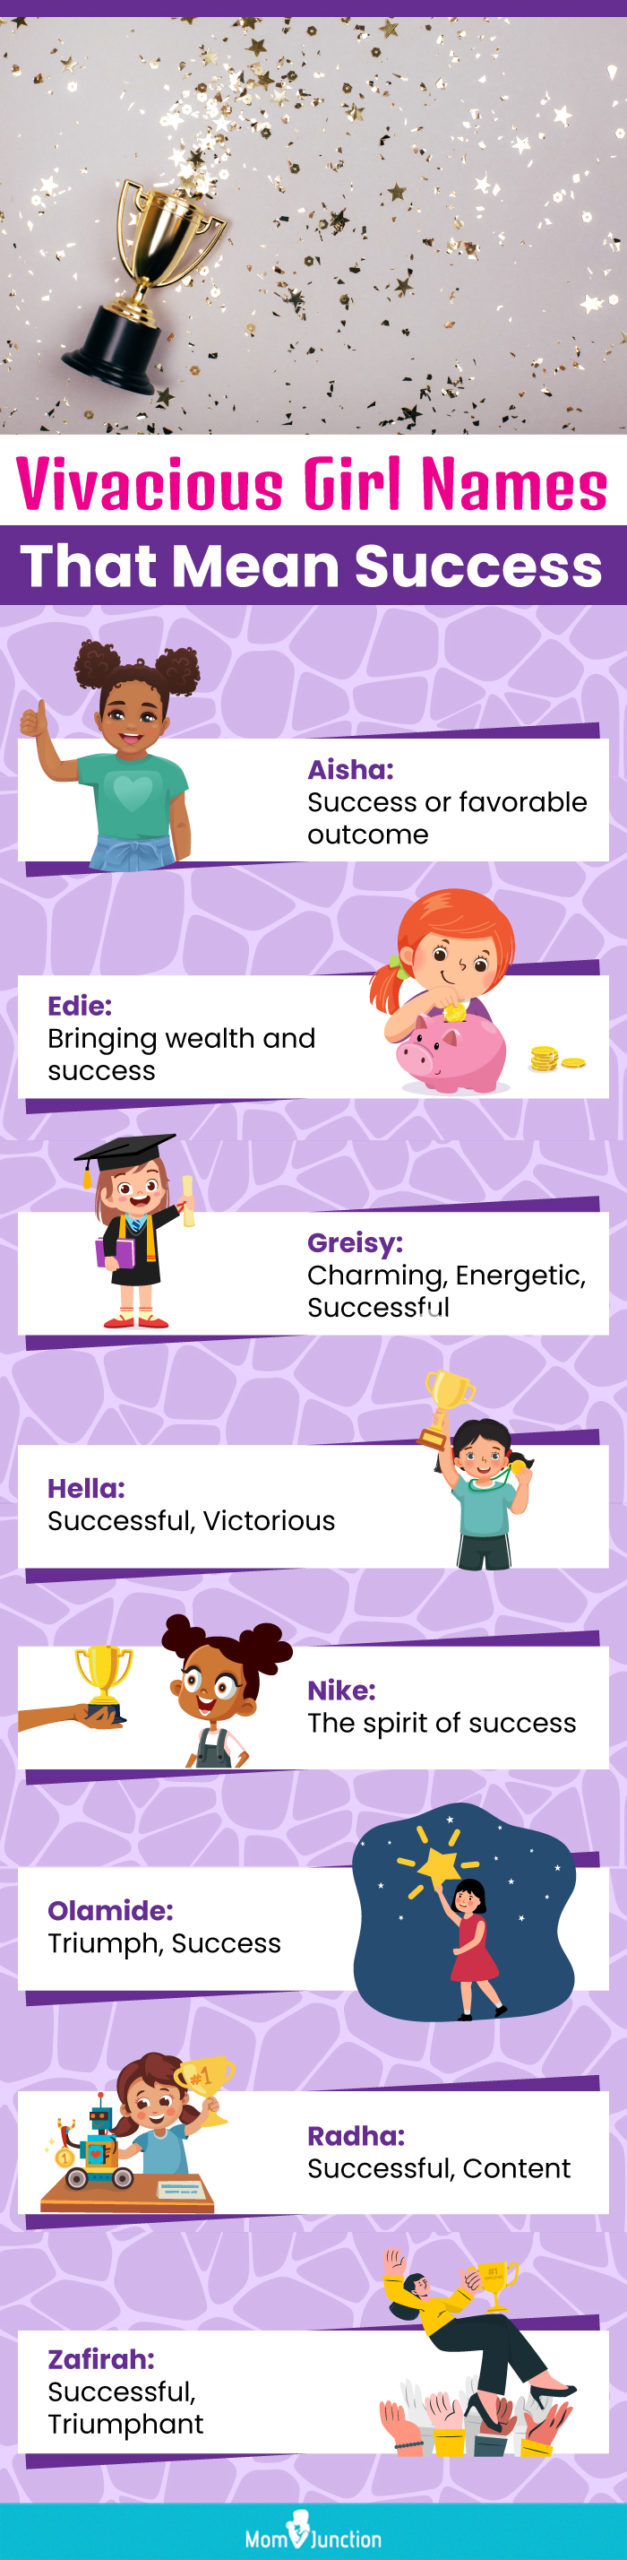 vivacious girl names that mean success (infographic)